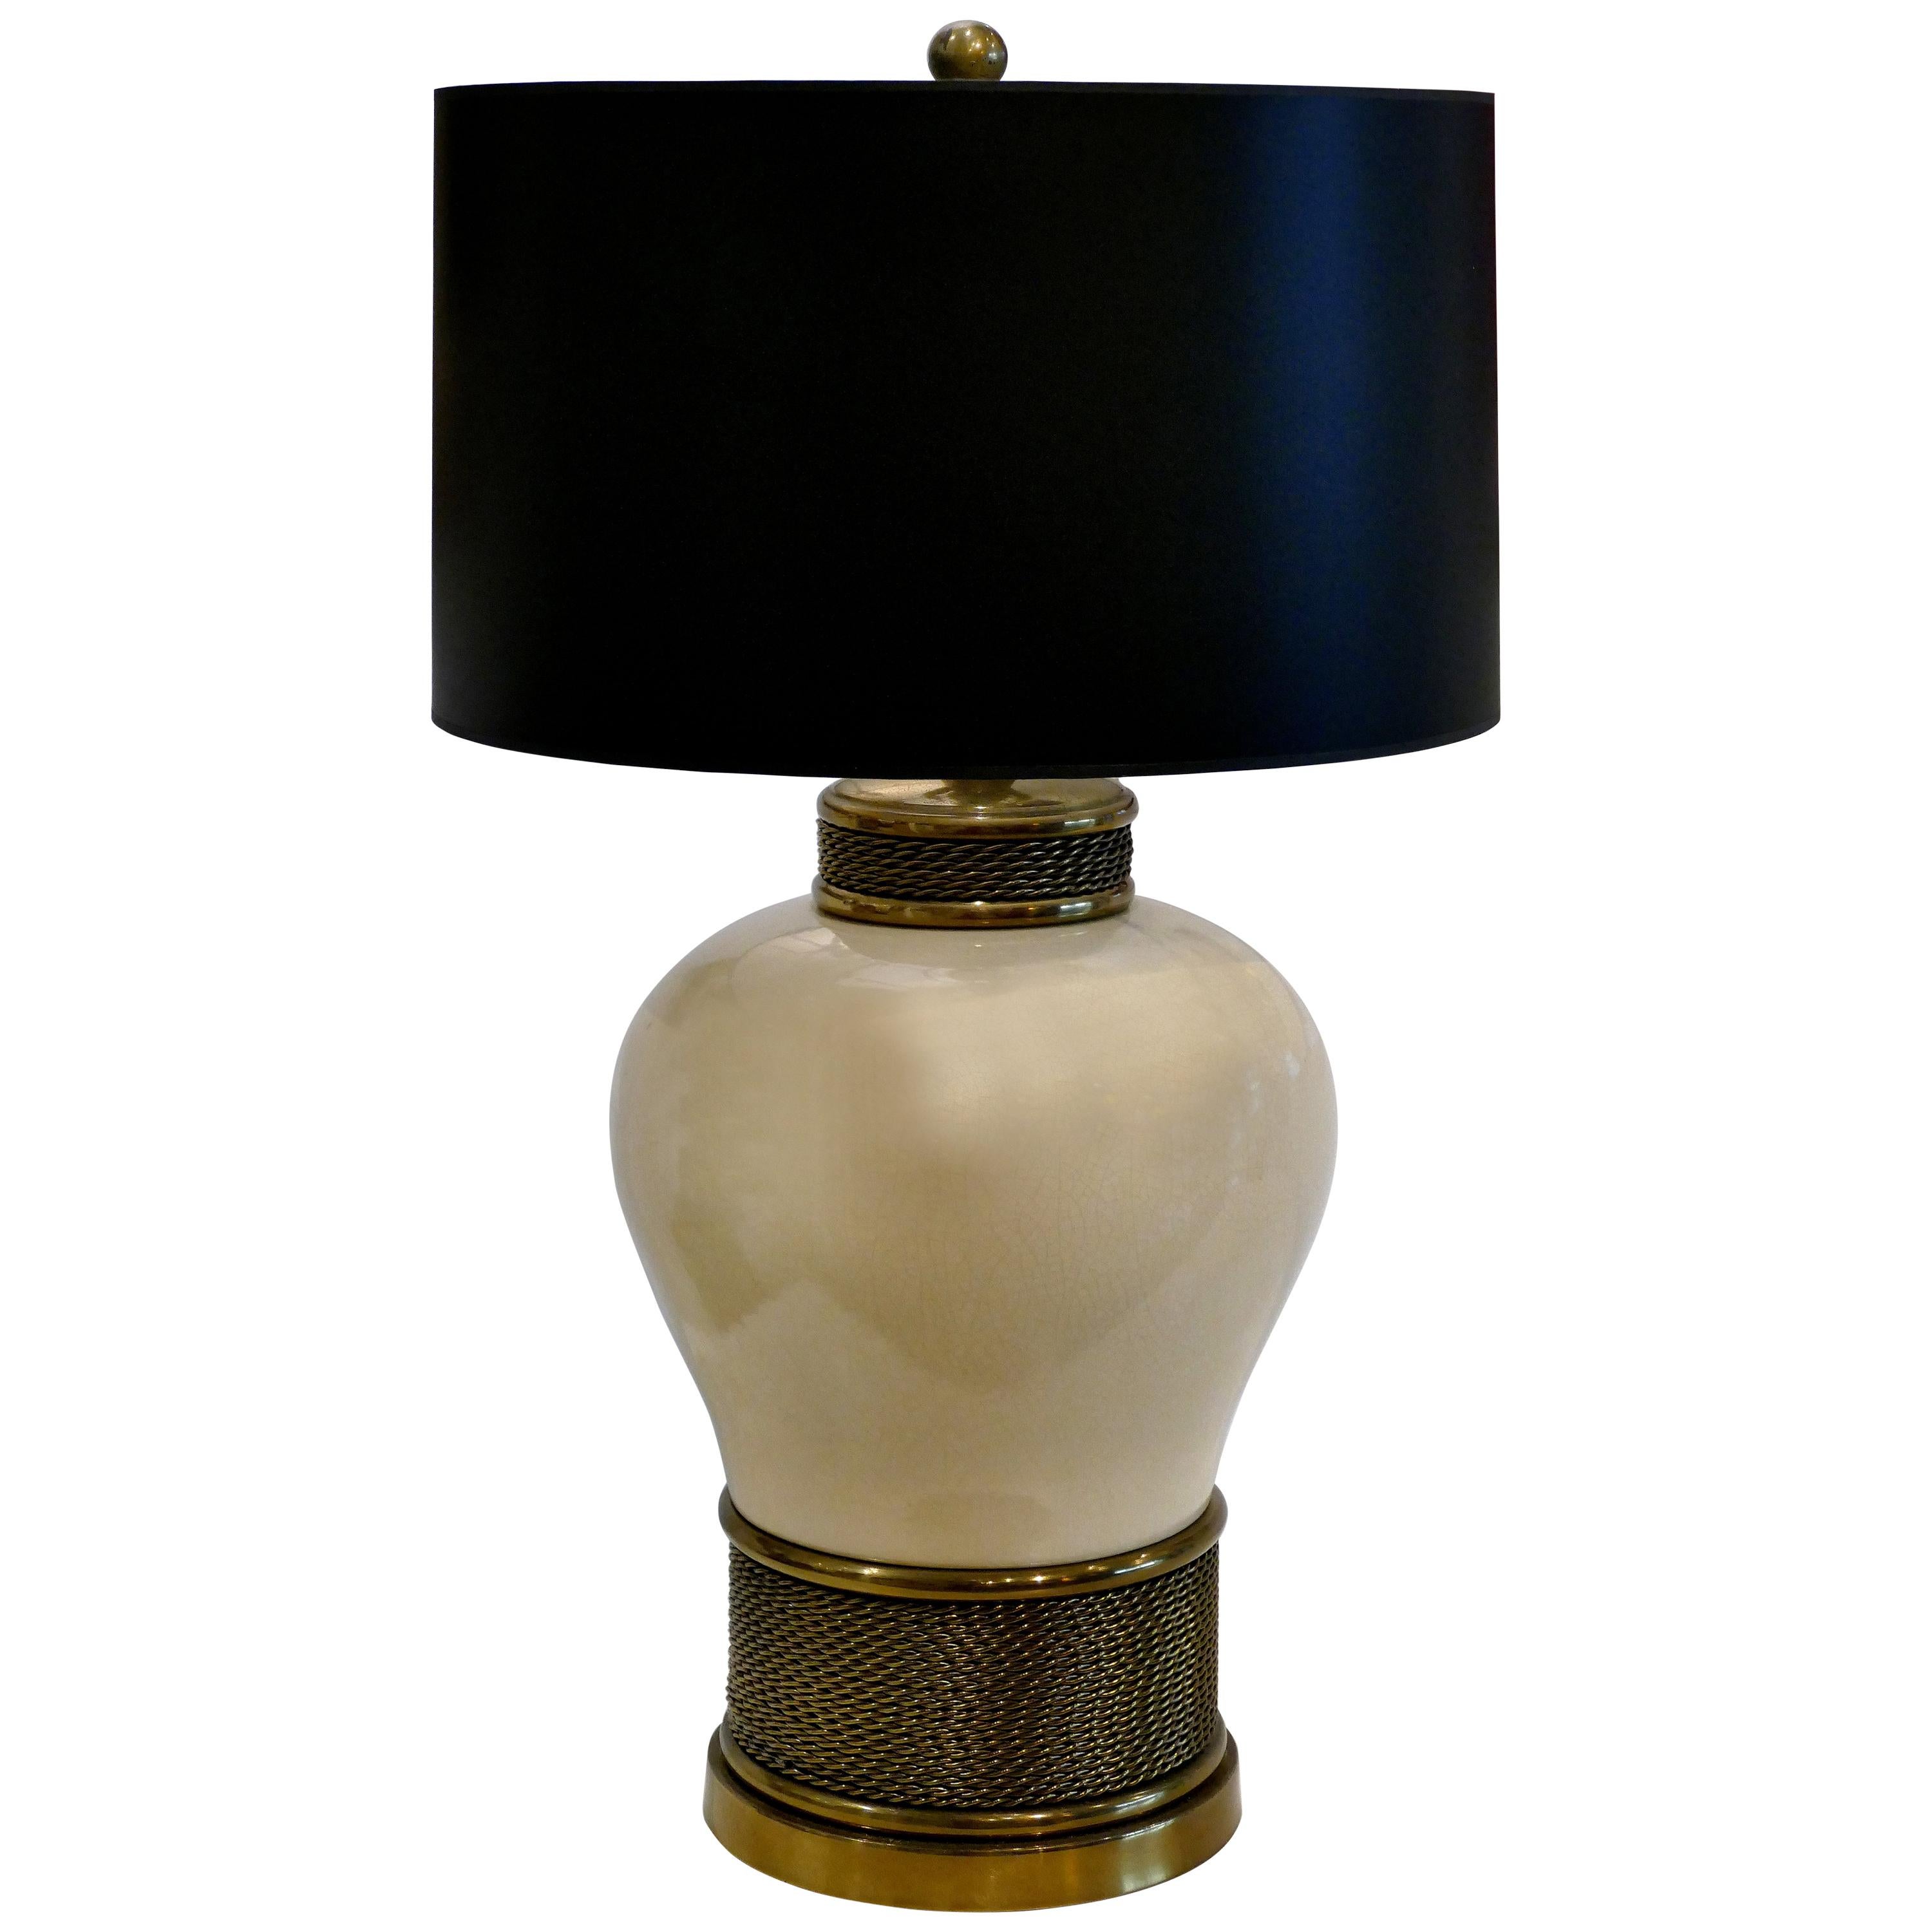 Mid-Century Modern Ceramic and Brass Table Lamp in an Urn Form